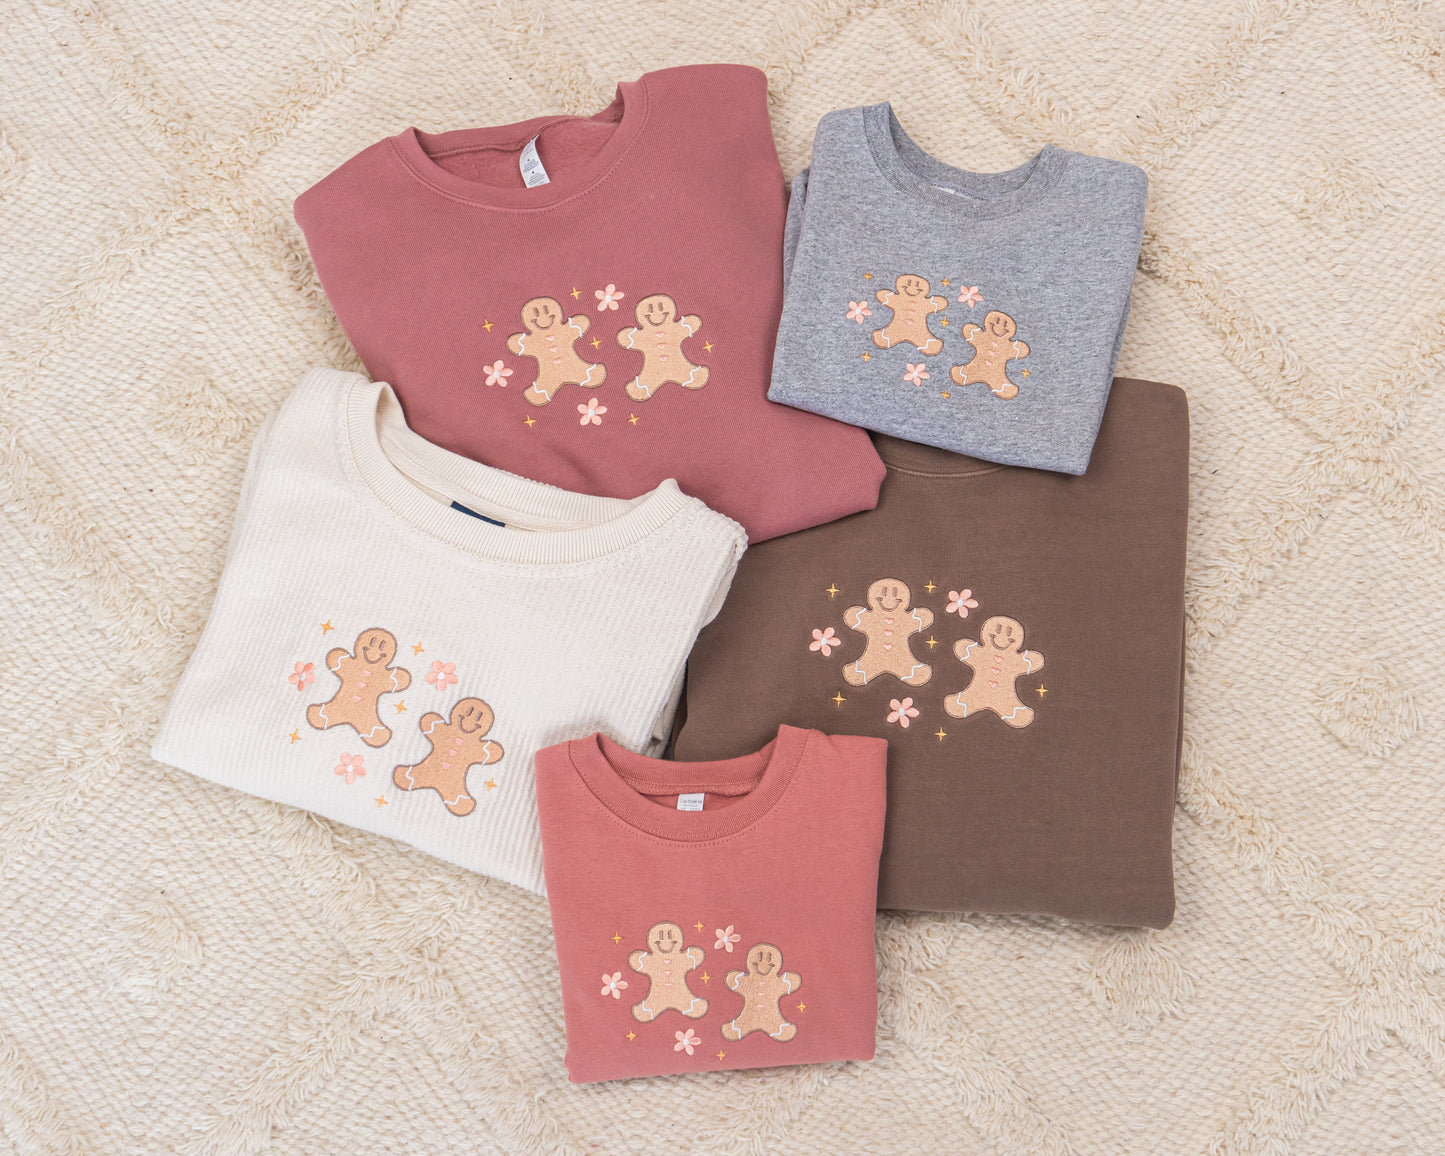 Daisy Gingerbread Cookies - Embroidered Sweatshirt (Cocoa)